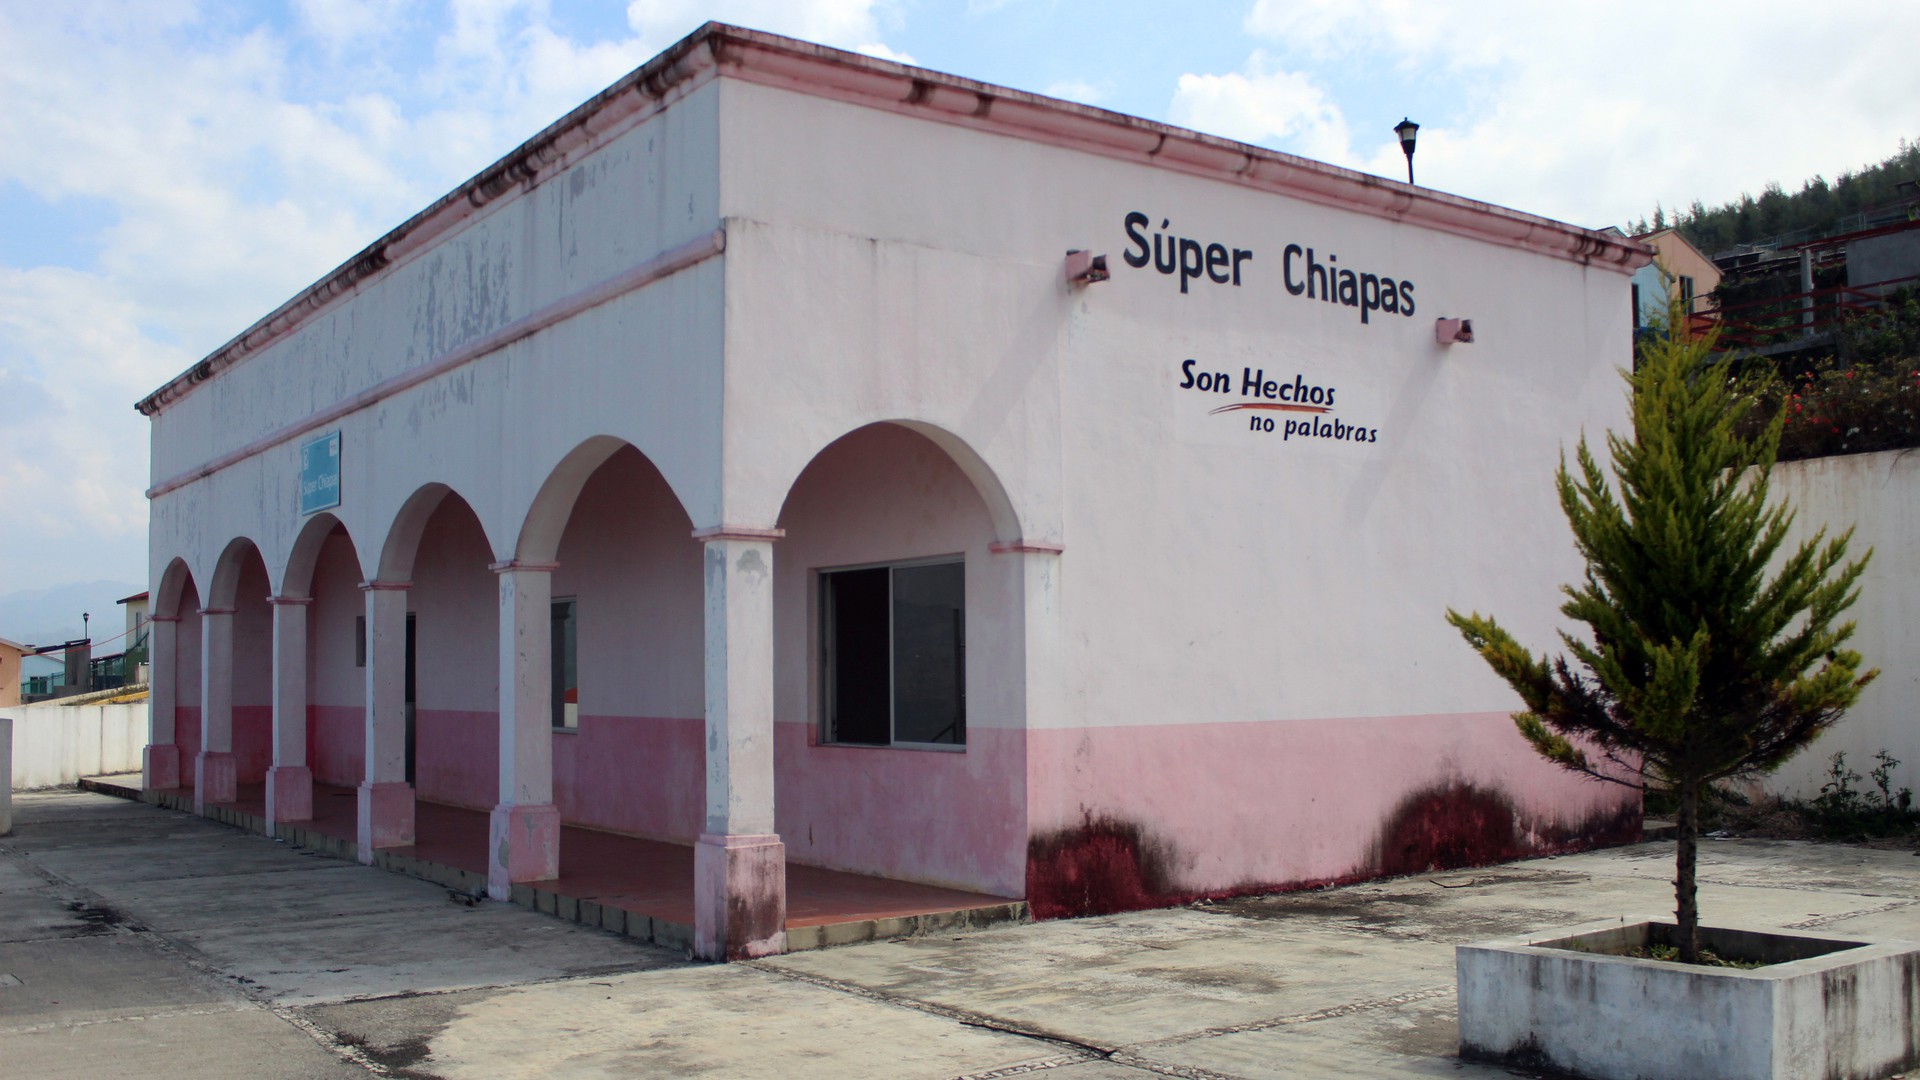 Supermarket Super Chiapas stands in the Sustainable Rural City of Santiago el Pinar. (Photo by Andrea Martinez.)